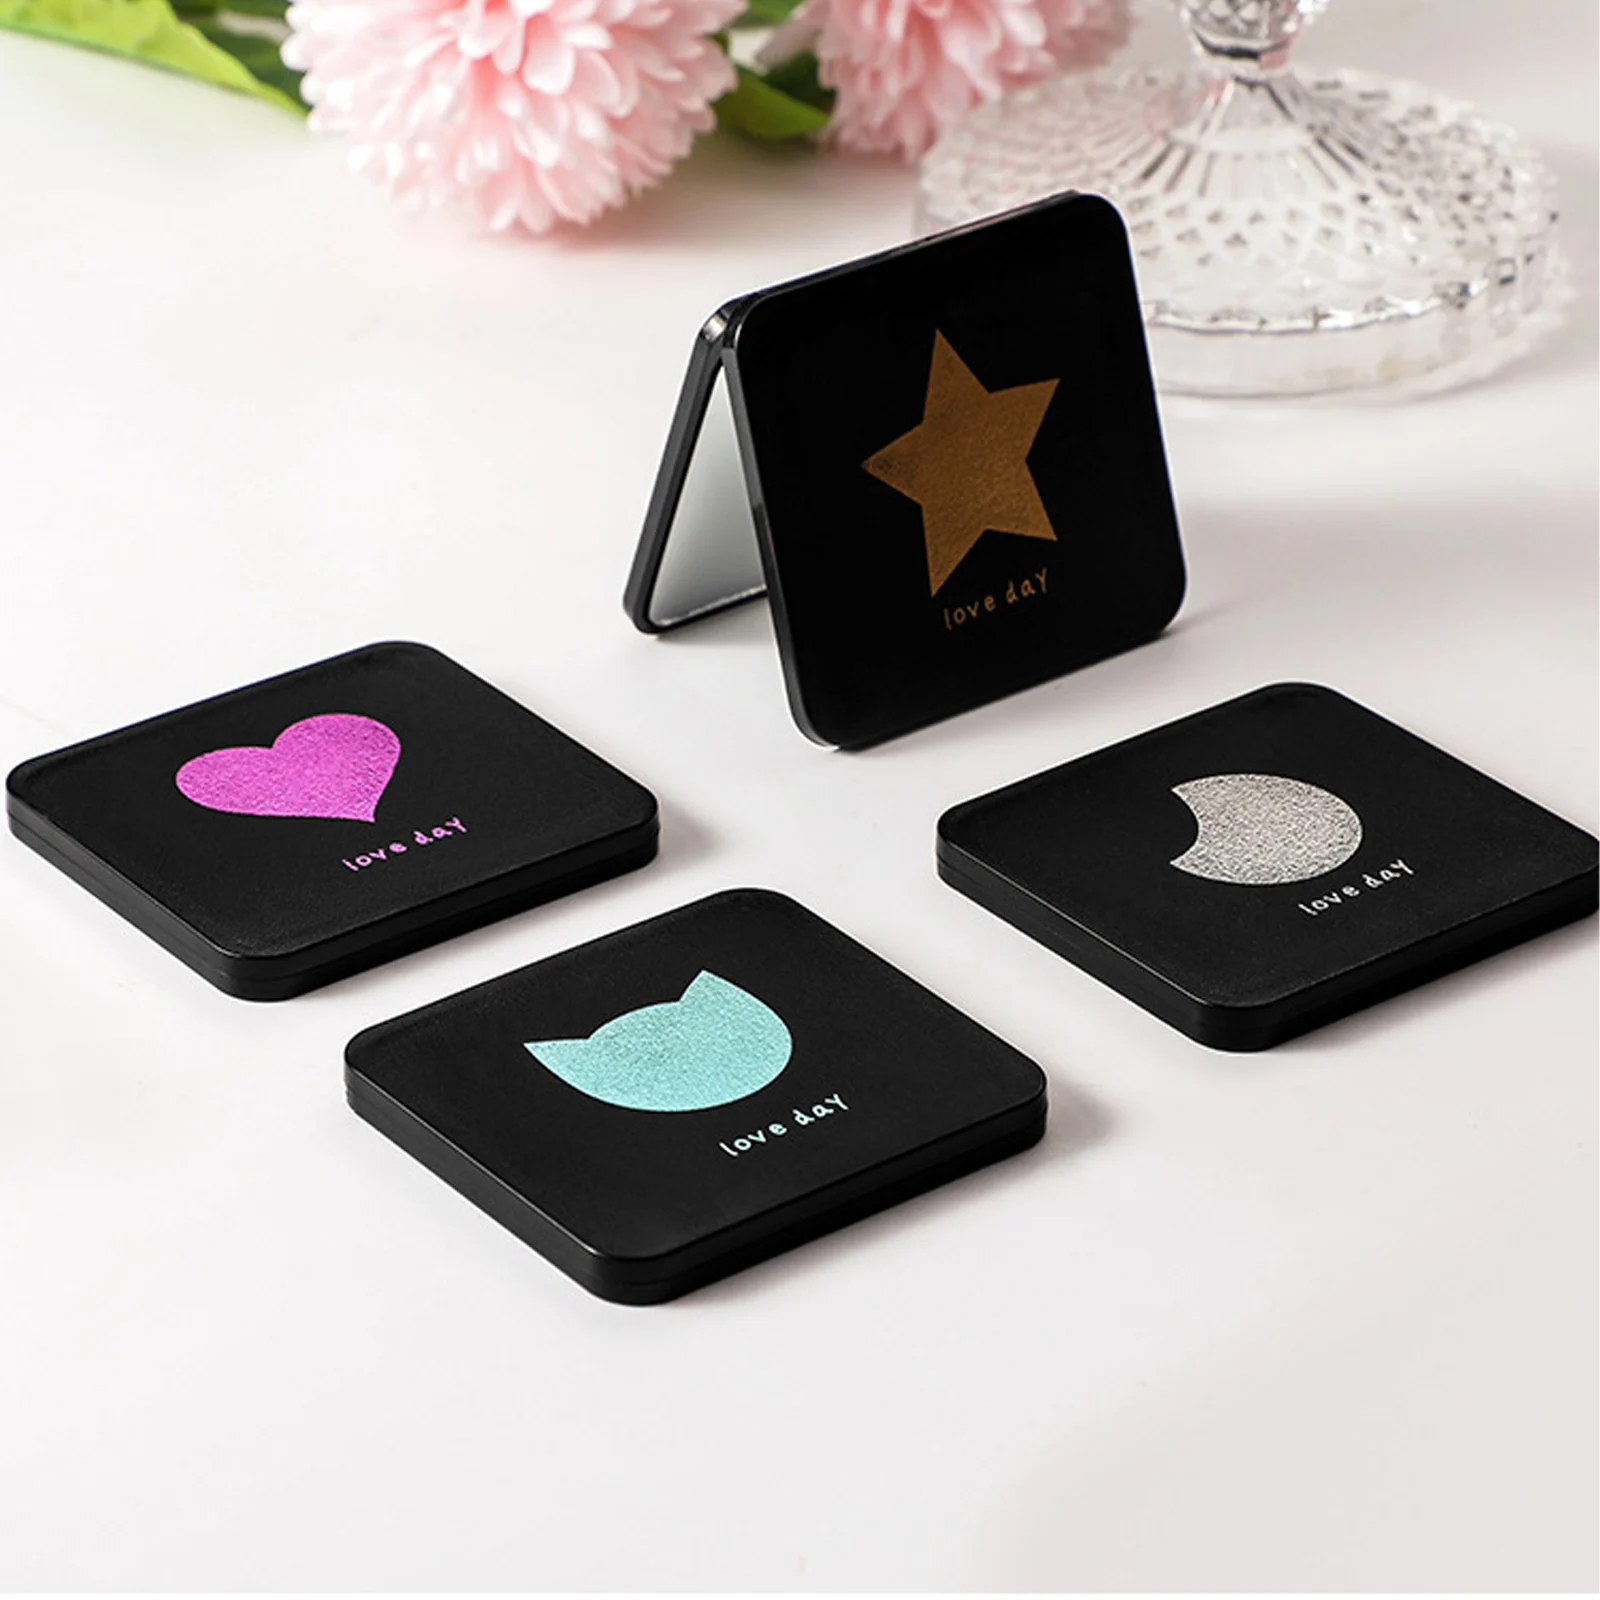 Mini Double Sided Makeup Mirror Folding Compact Mirror Female Portable Travel Square Handheld Pocket Mirror Makeup Accessories winter fur scarf female mink hair solid colour double sided neck scarf fox hair warm real hair collar